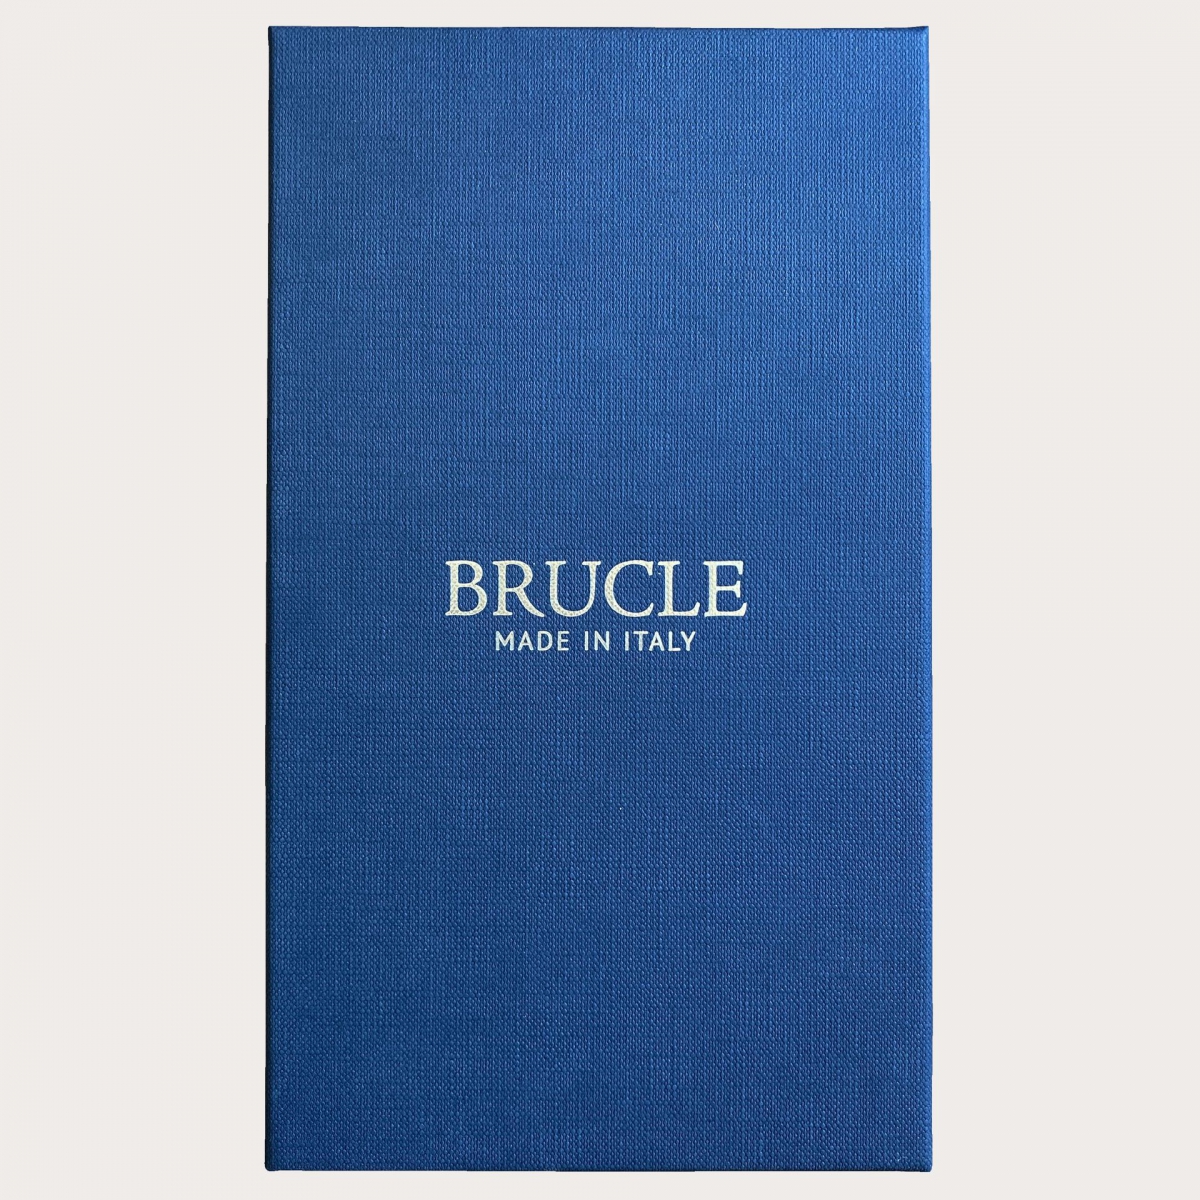 BRUCLE Refined thin suspenders in brown jacquard silk with light blue dotted pattern